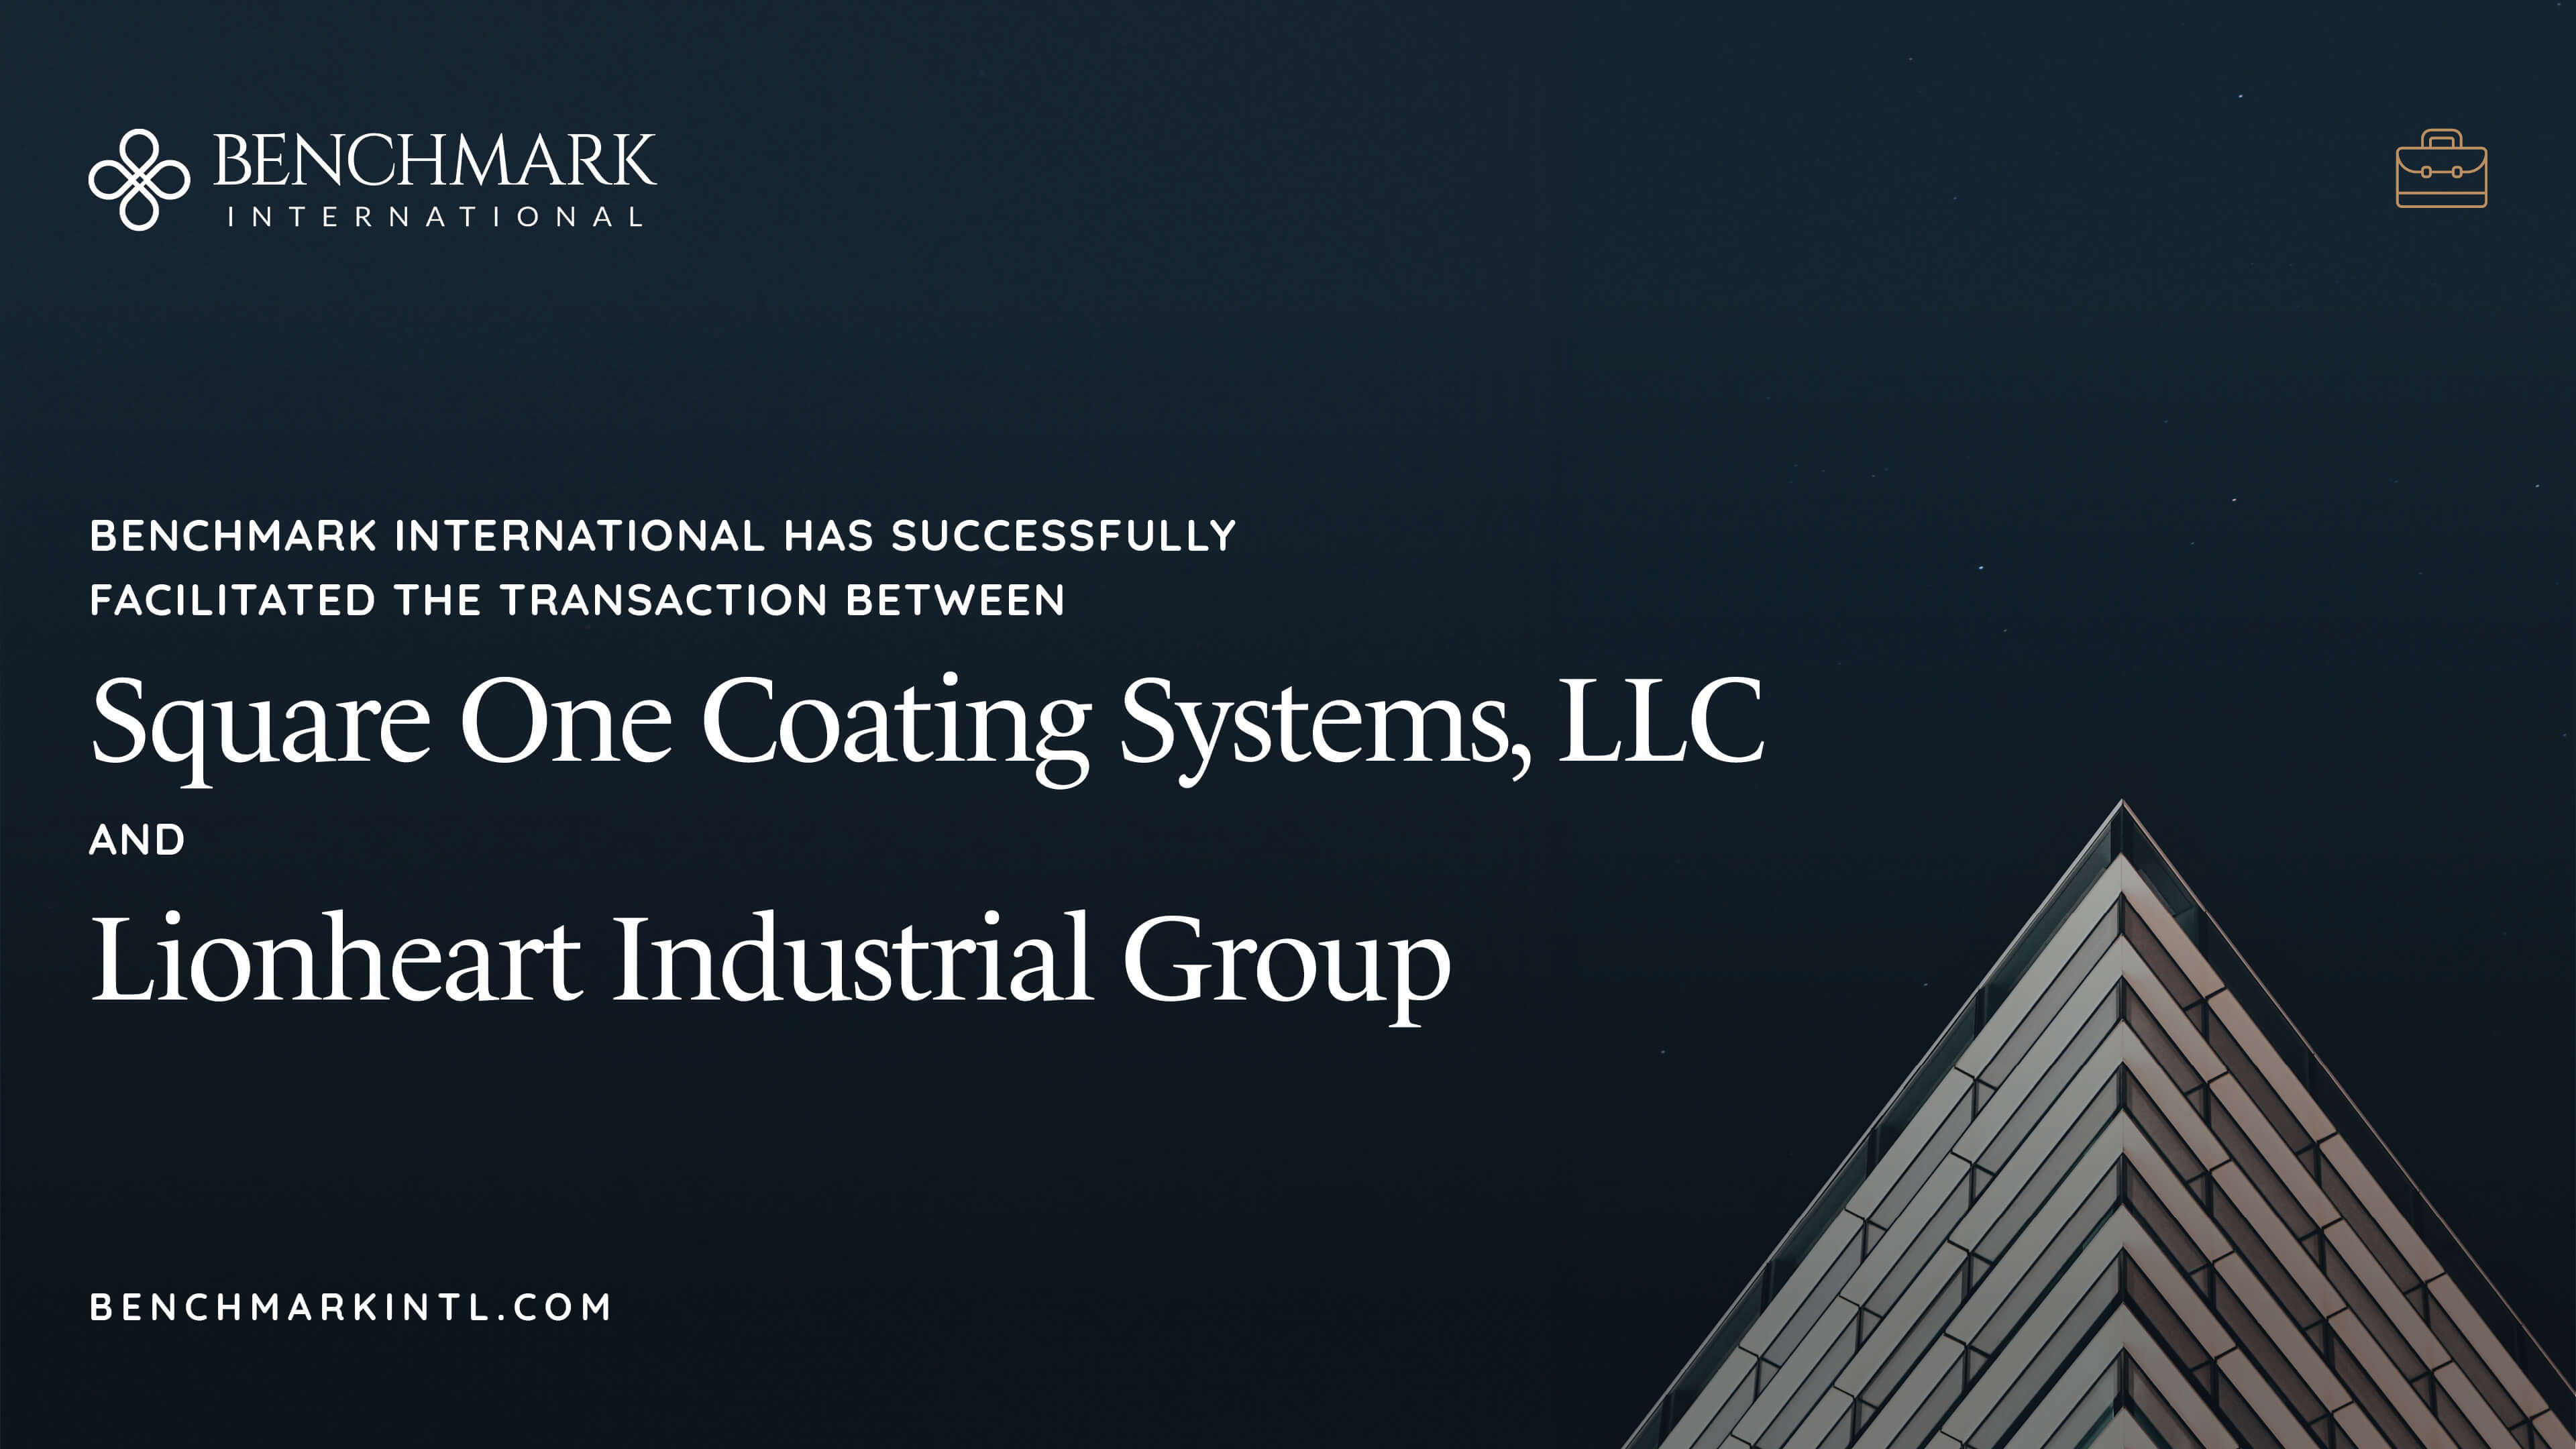 Benchmark International Has Successfully Facilitated The Transaction Between Square One Coating Systems, LLC And Lionheart Industrial Group